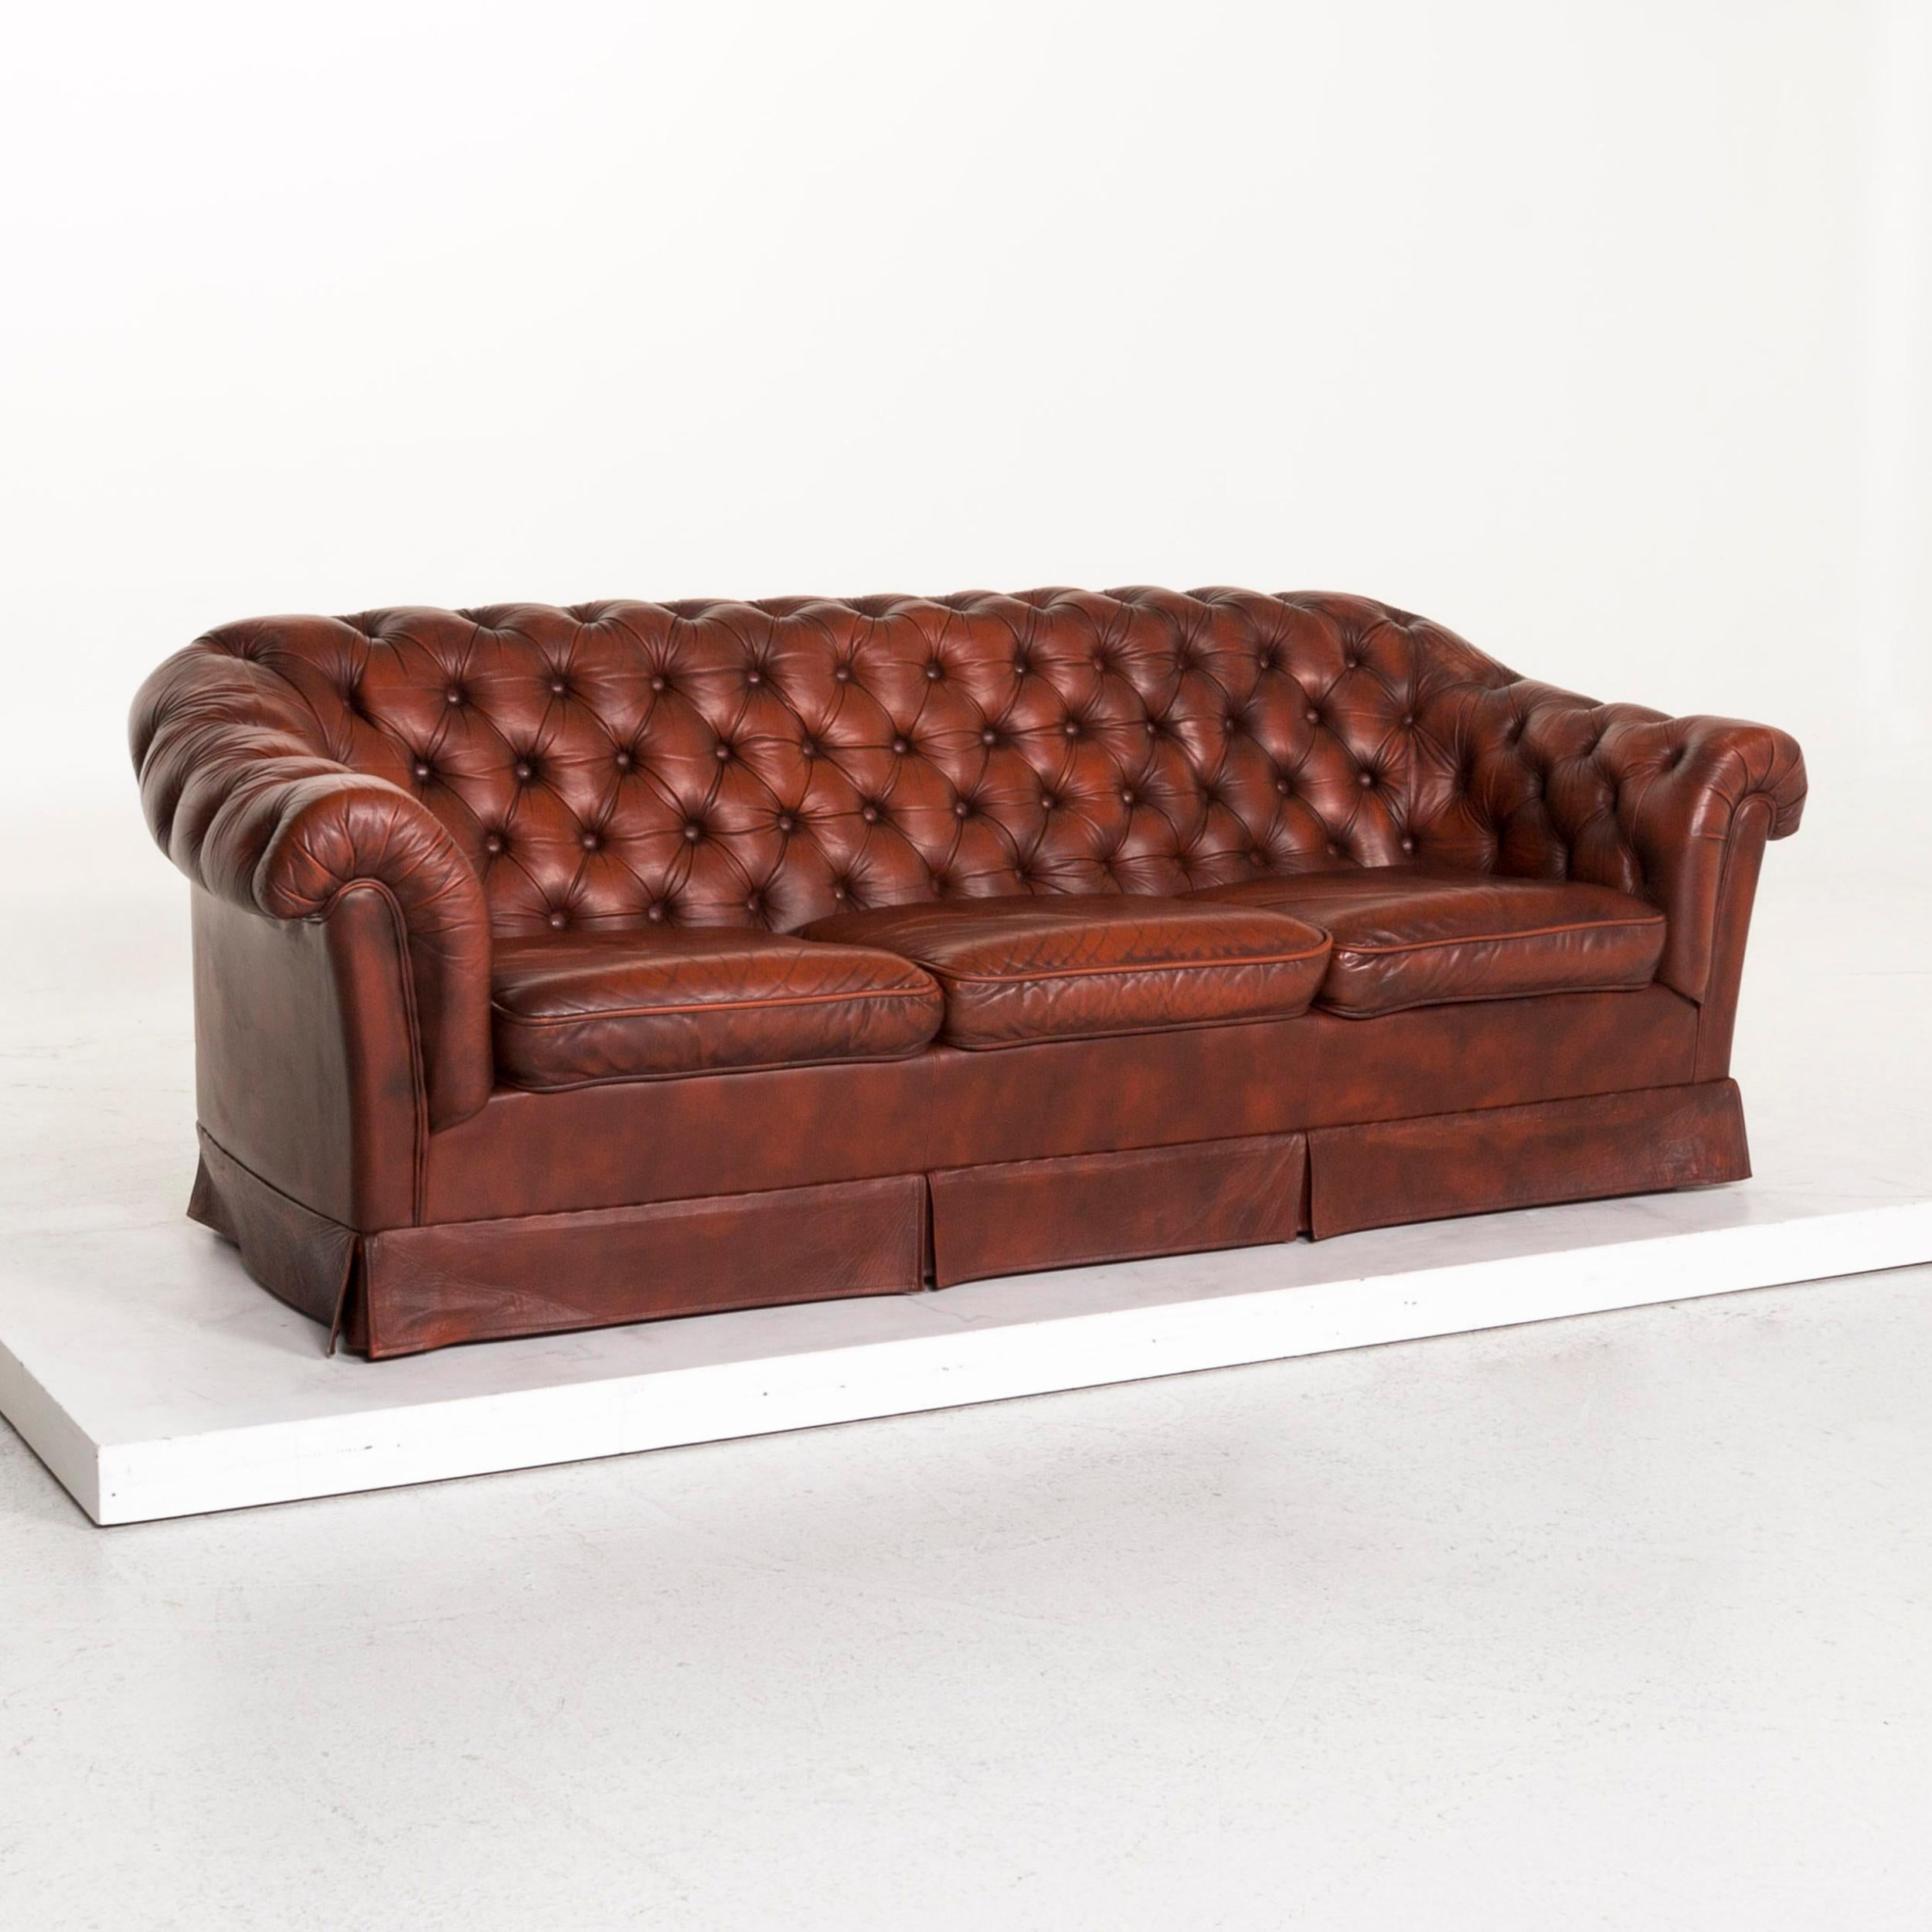 British Chesterfield Leather Sofa Red Three-Seat Retro Vintage Couch For Sale